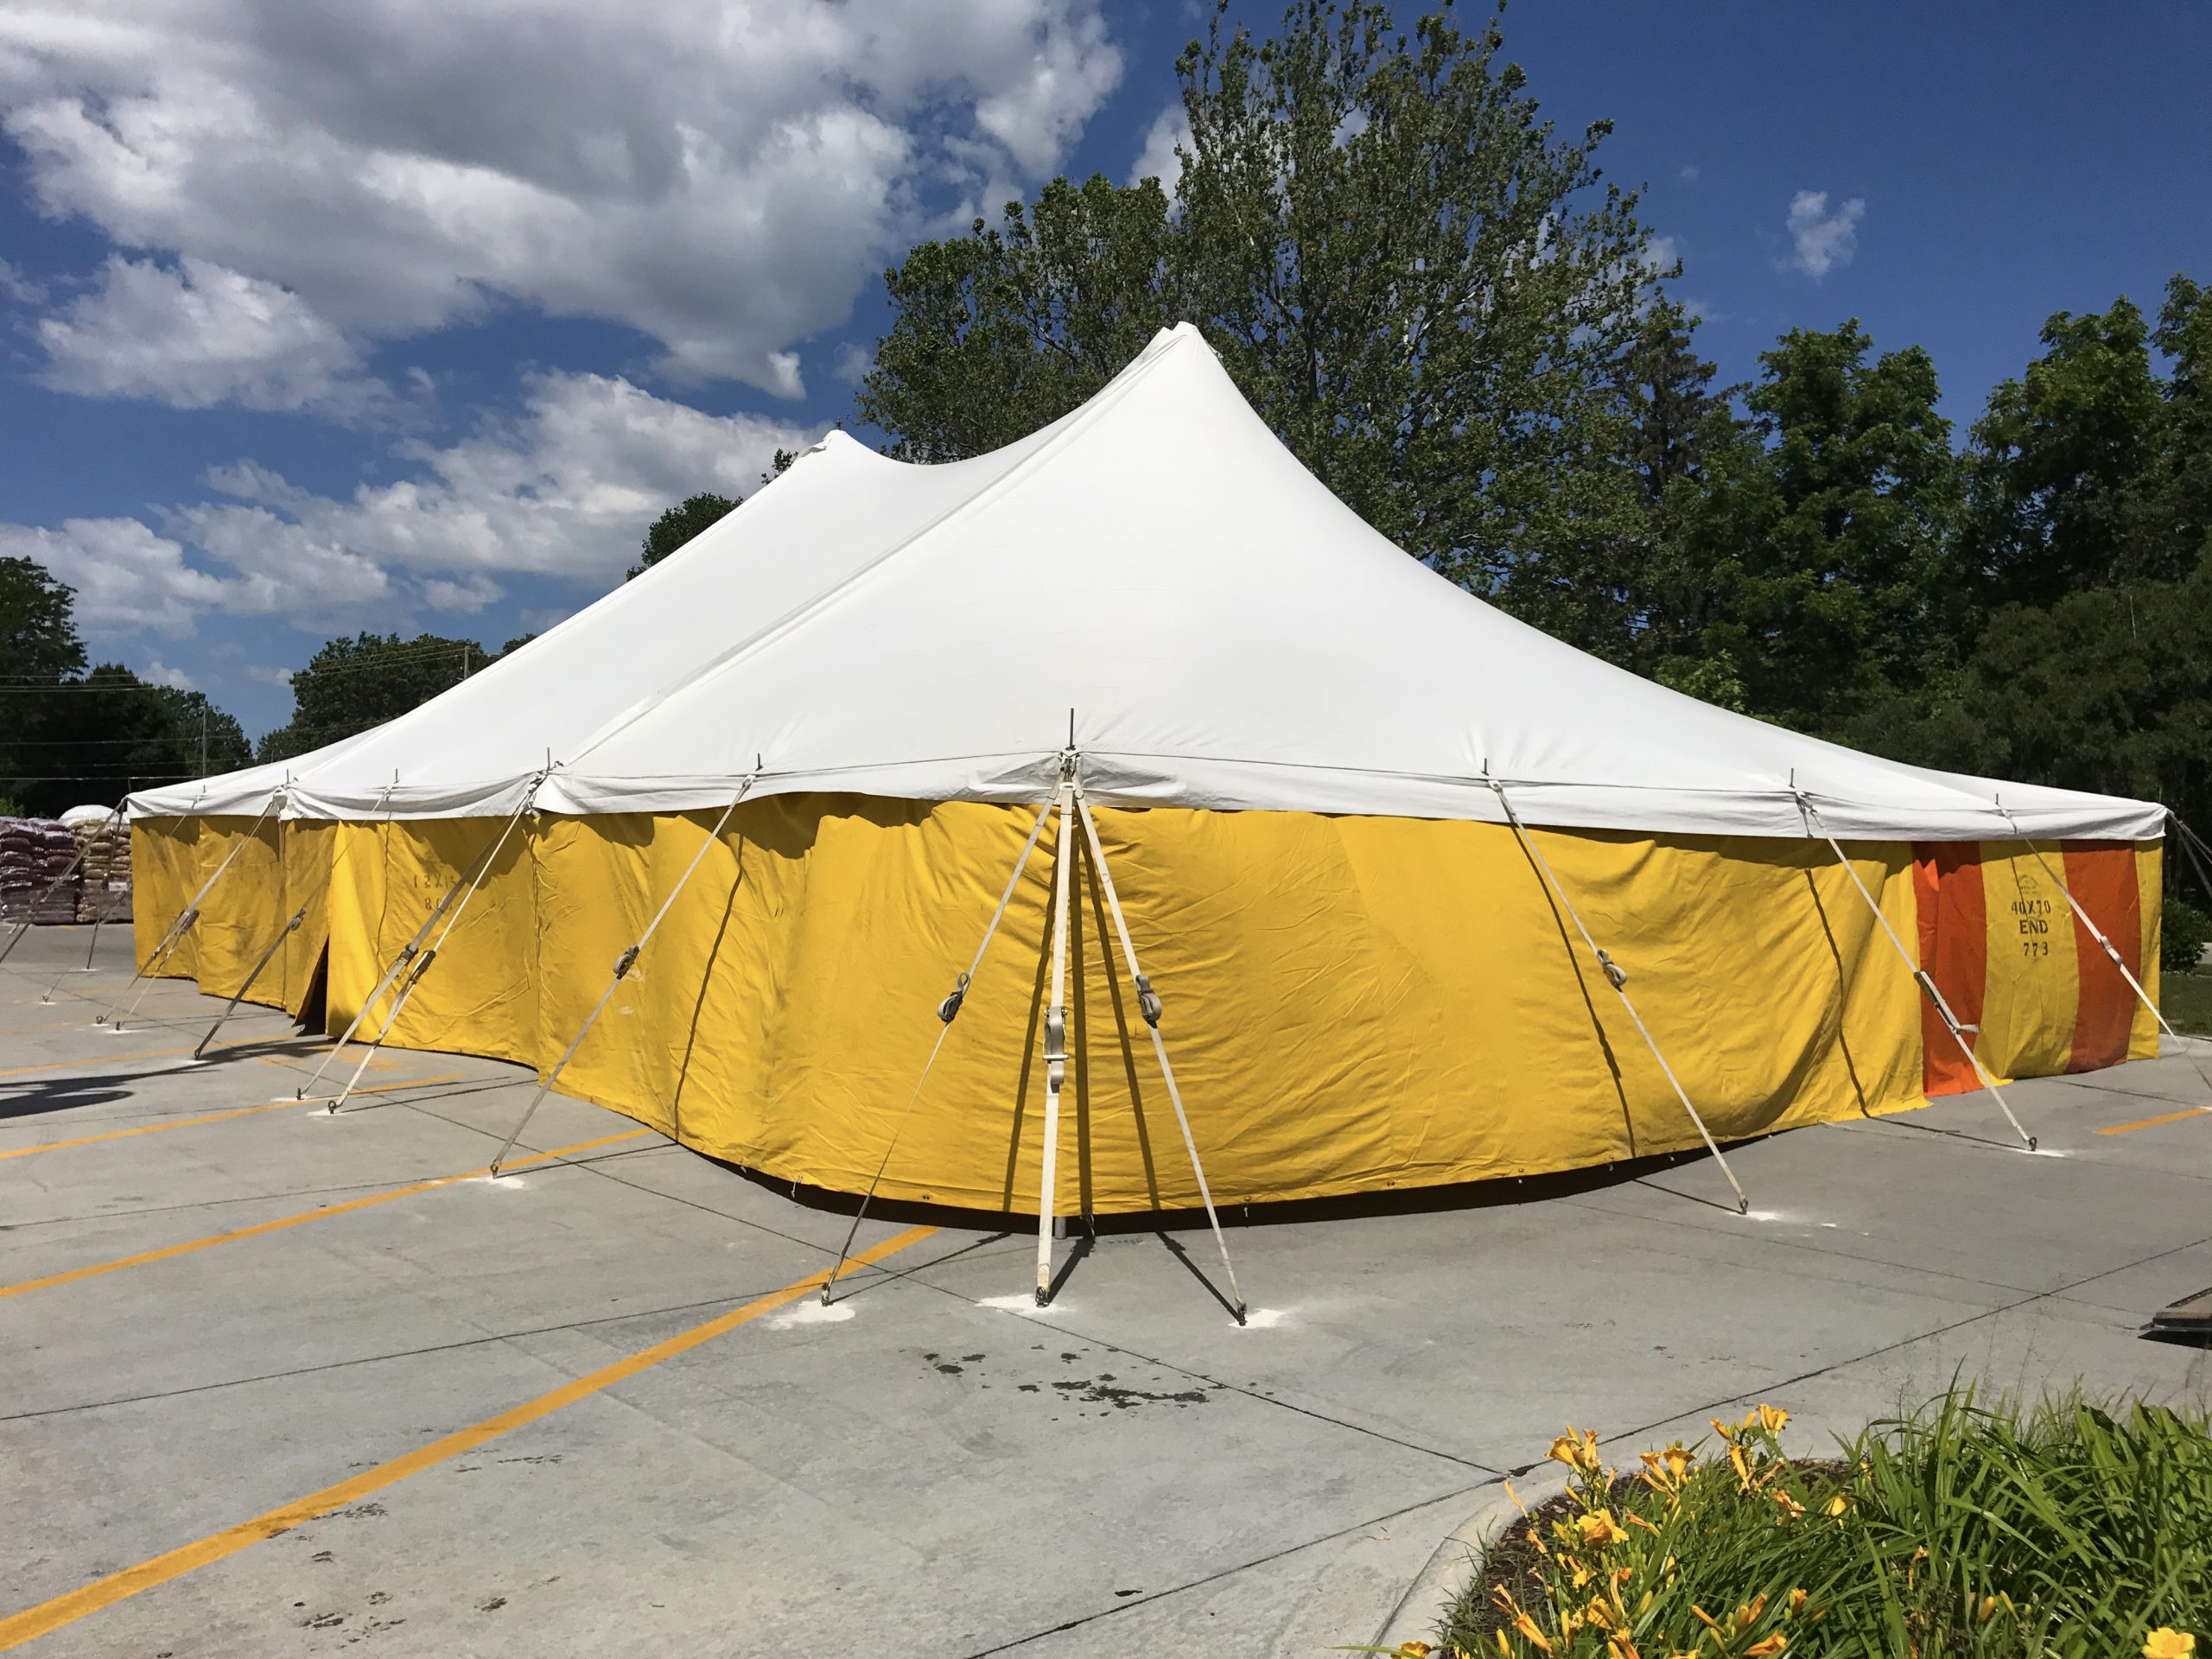 40' x 60' rope and pole fireworks tent with yellow sidewalls at HyVee on Dodge St. in Iowa City for Bellino Fireworks